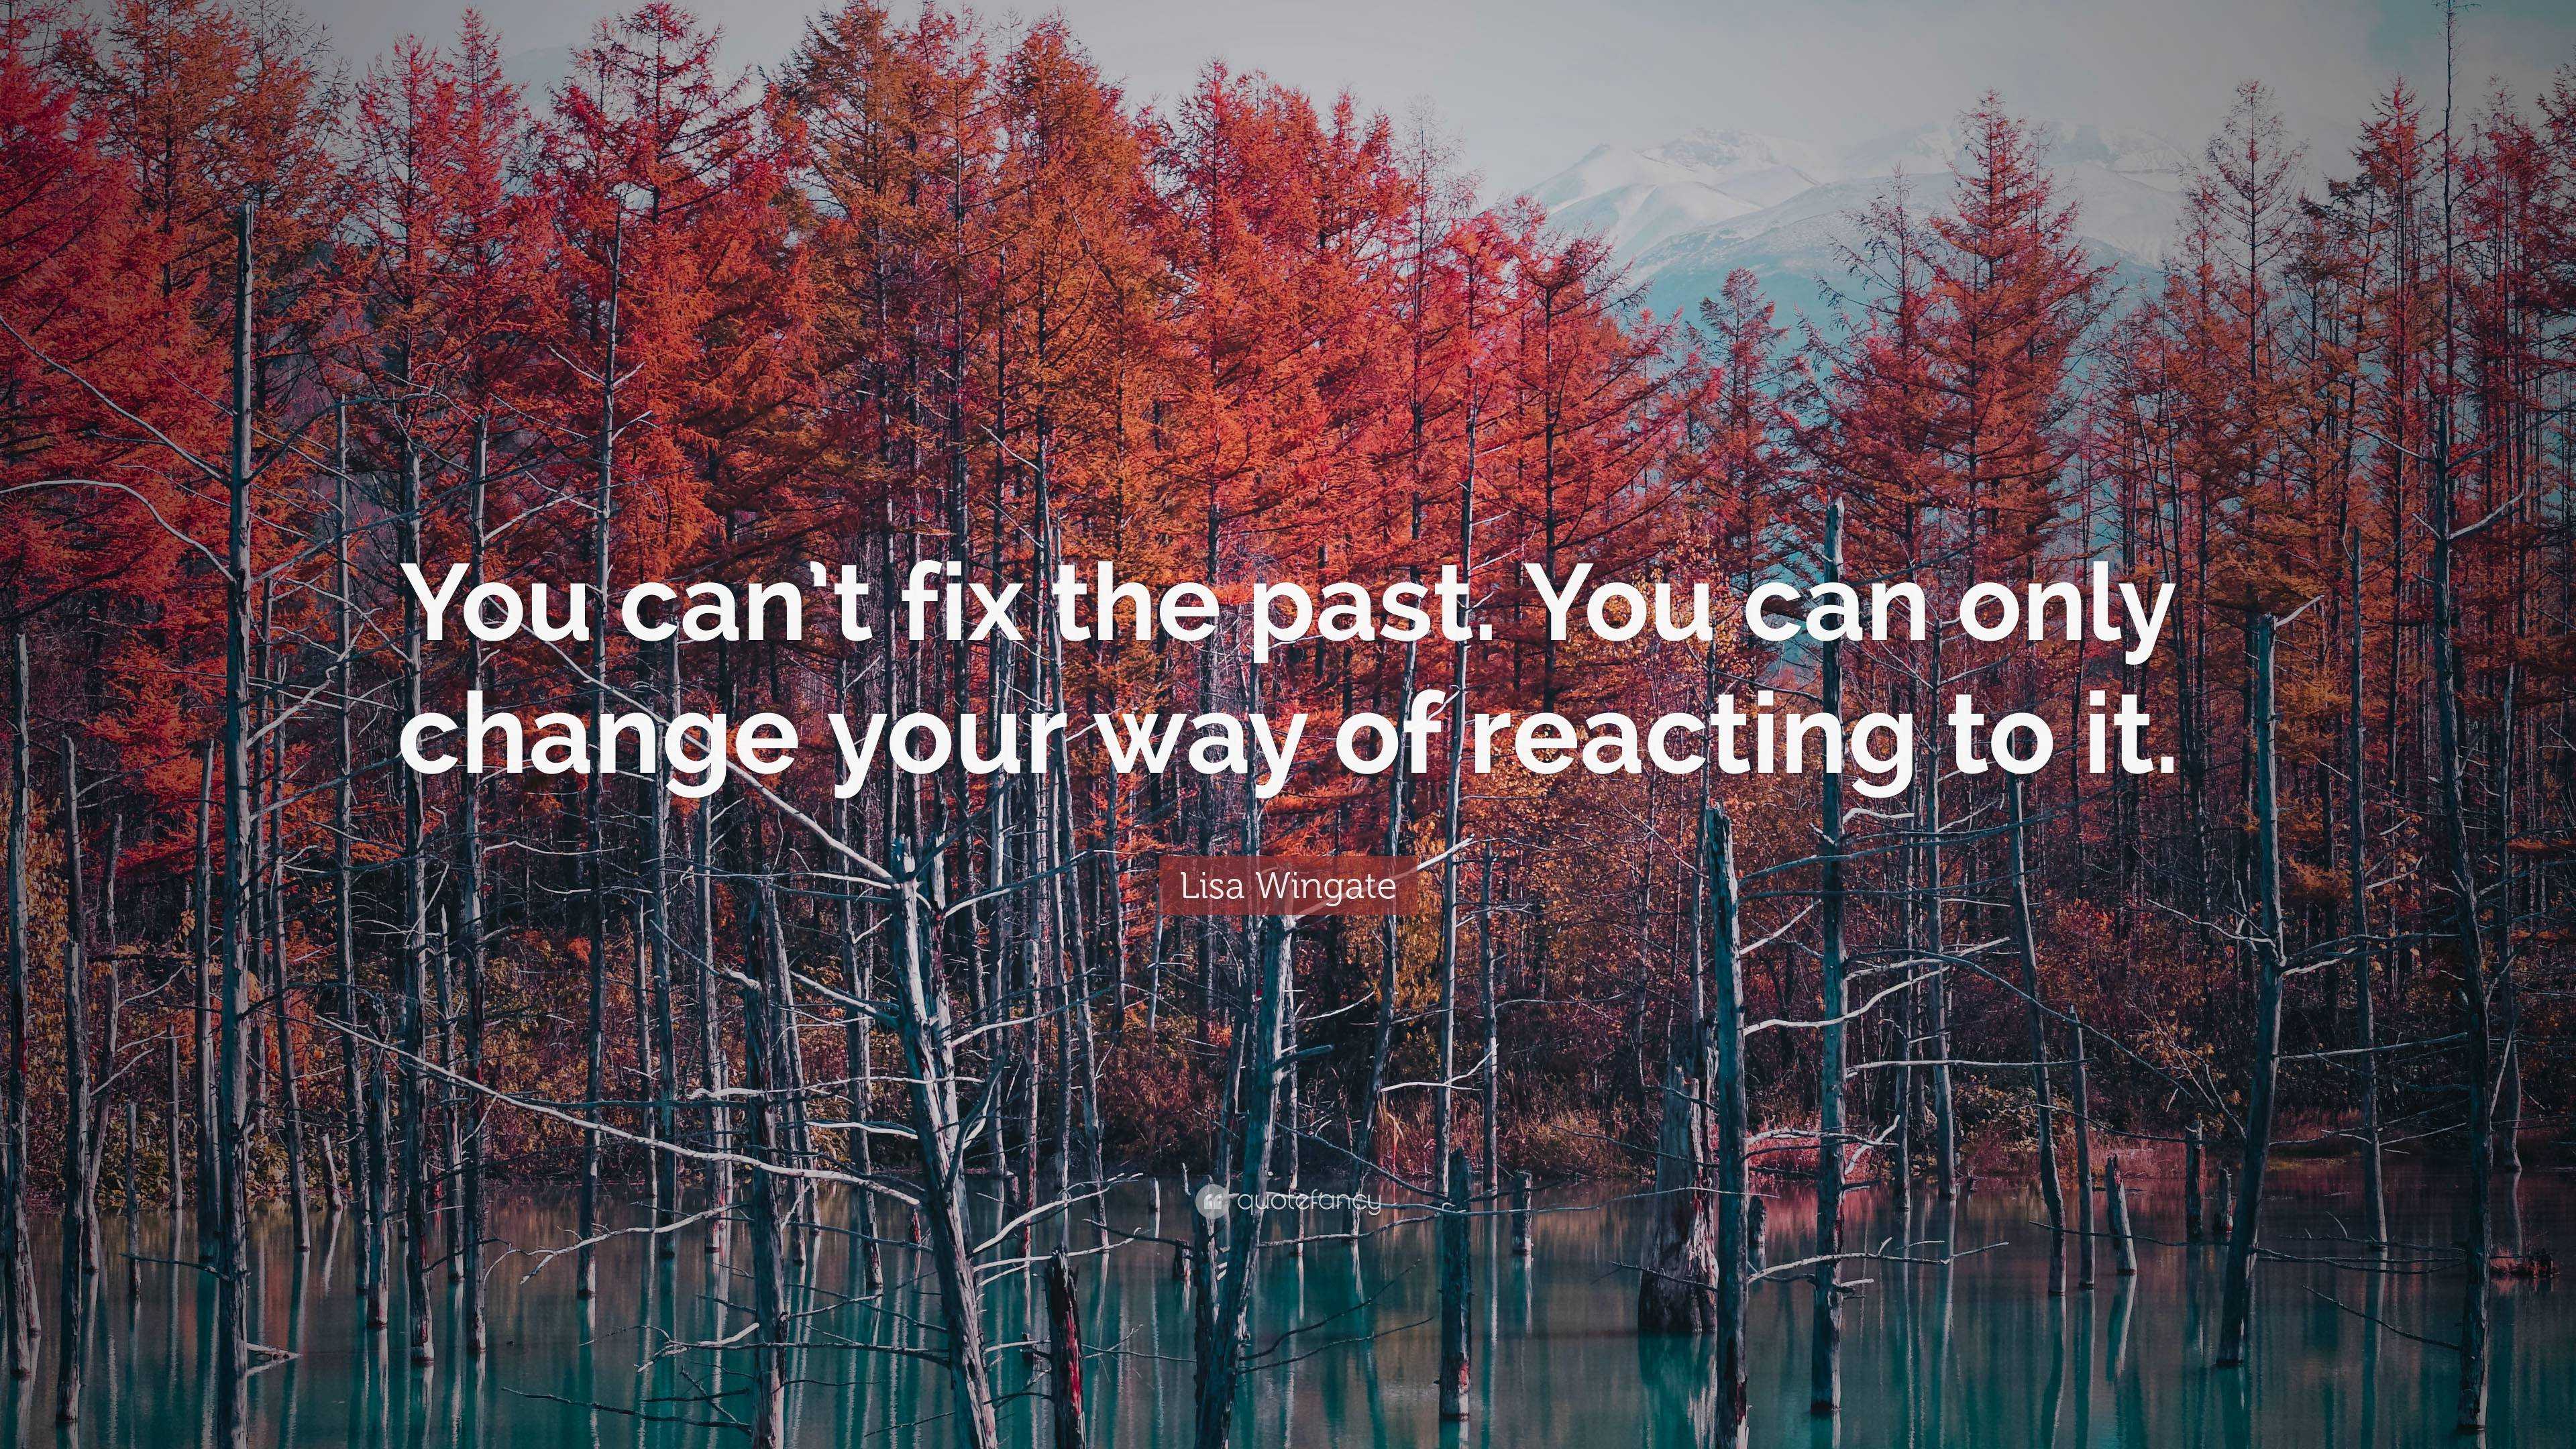 Lisa Wingate Quote: “You can’t fix the past. You can only change your ...